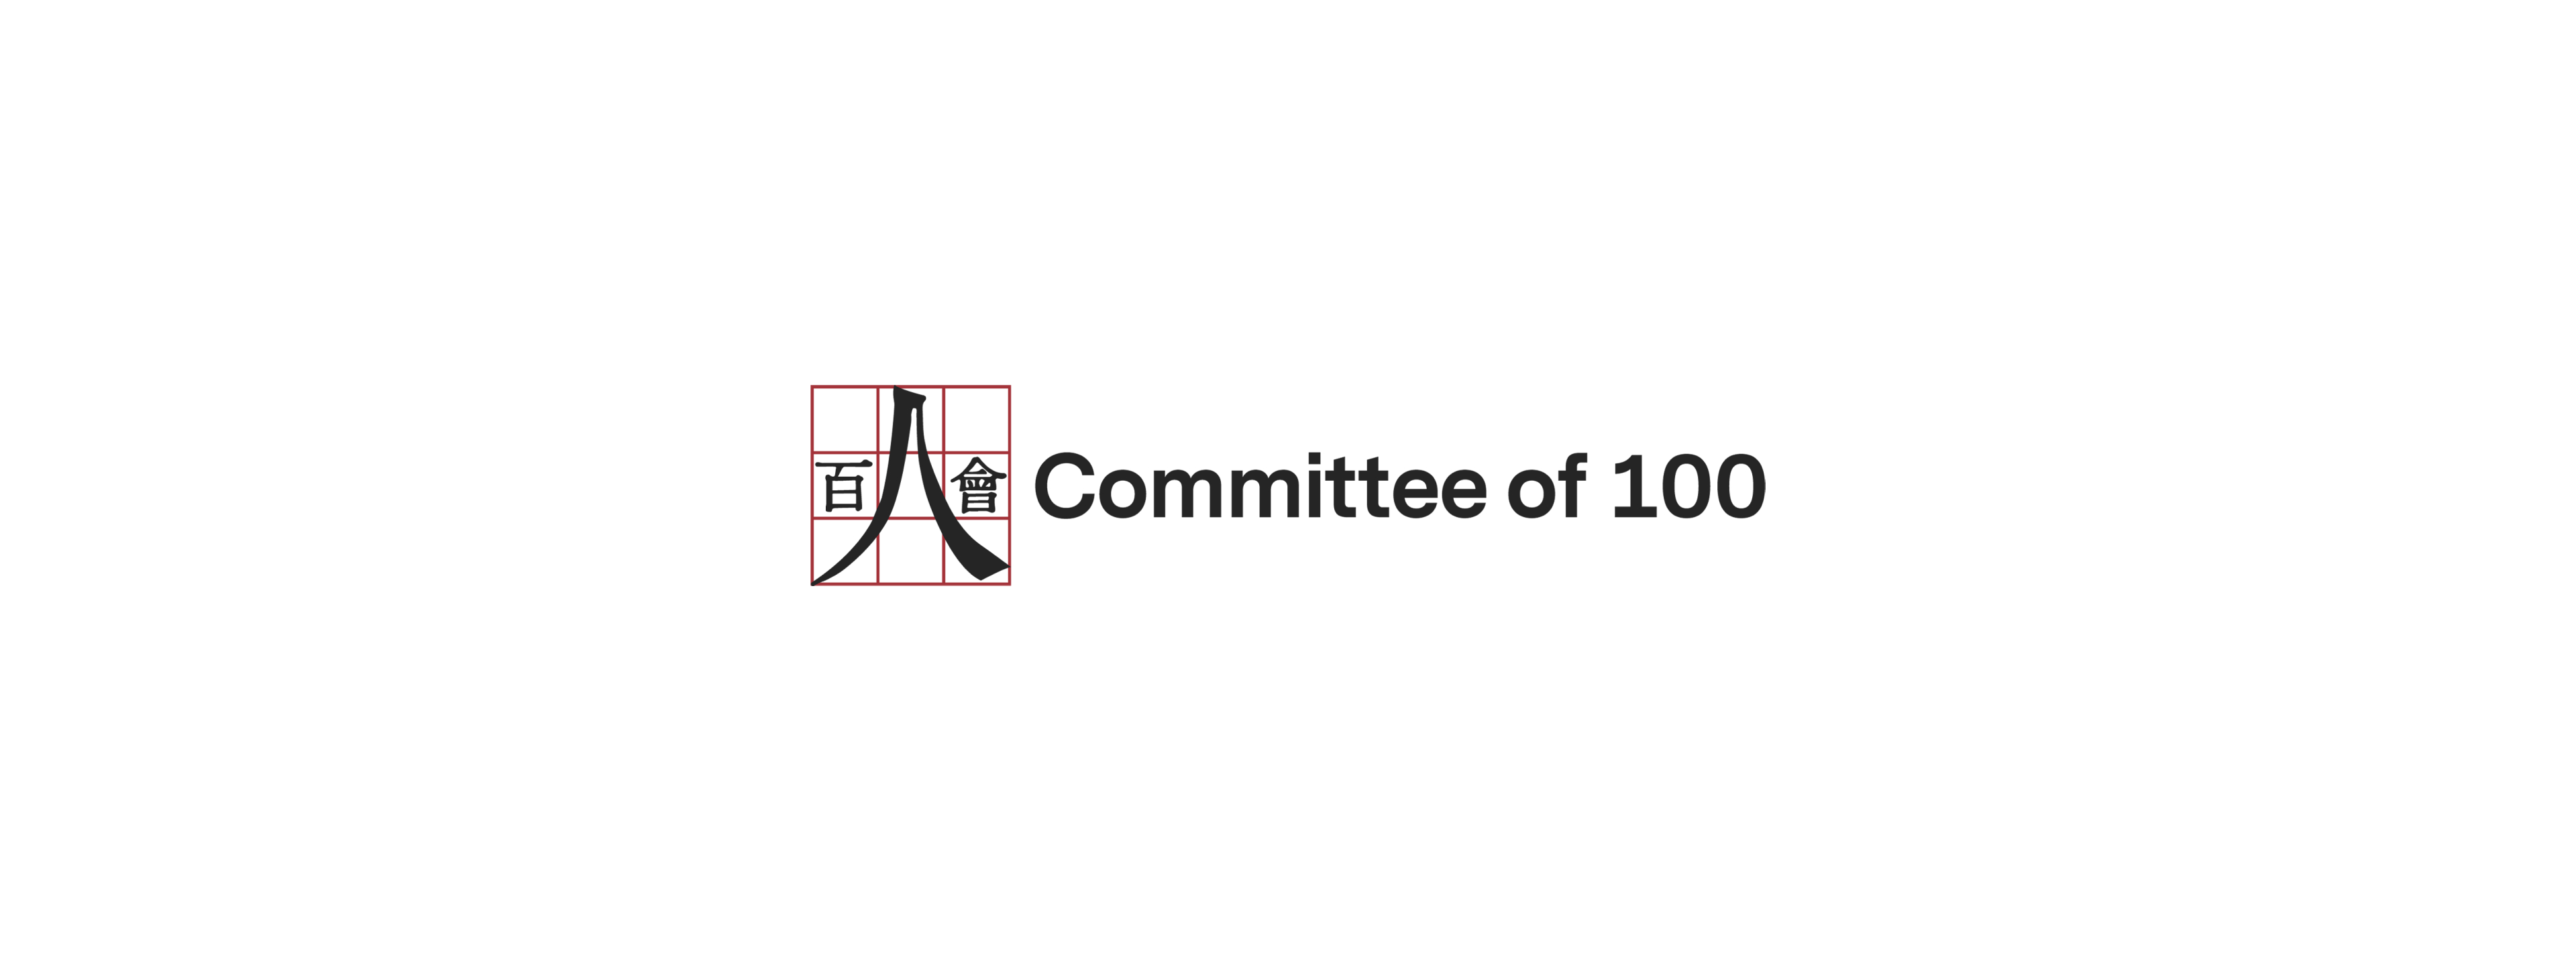 Statement from Committee of 100 on the Declassified Report  on the Origins of COVID-19